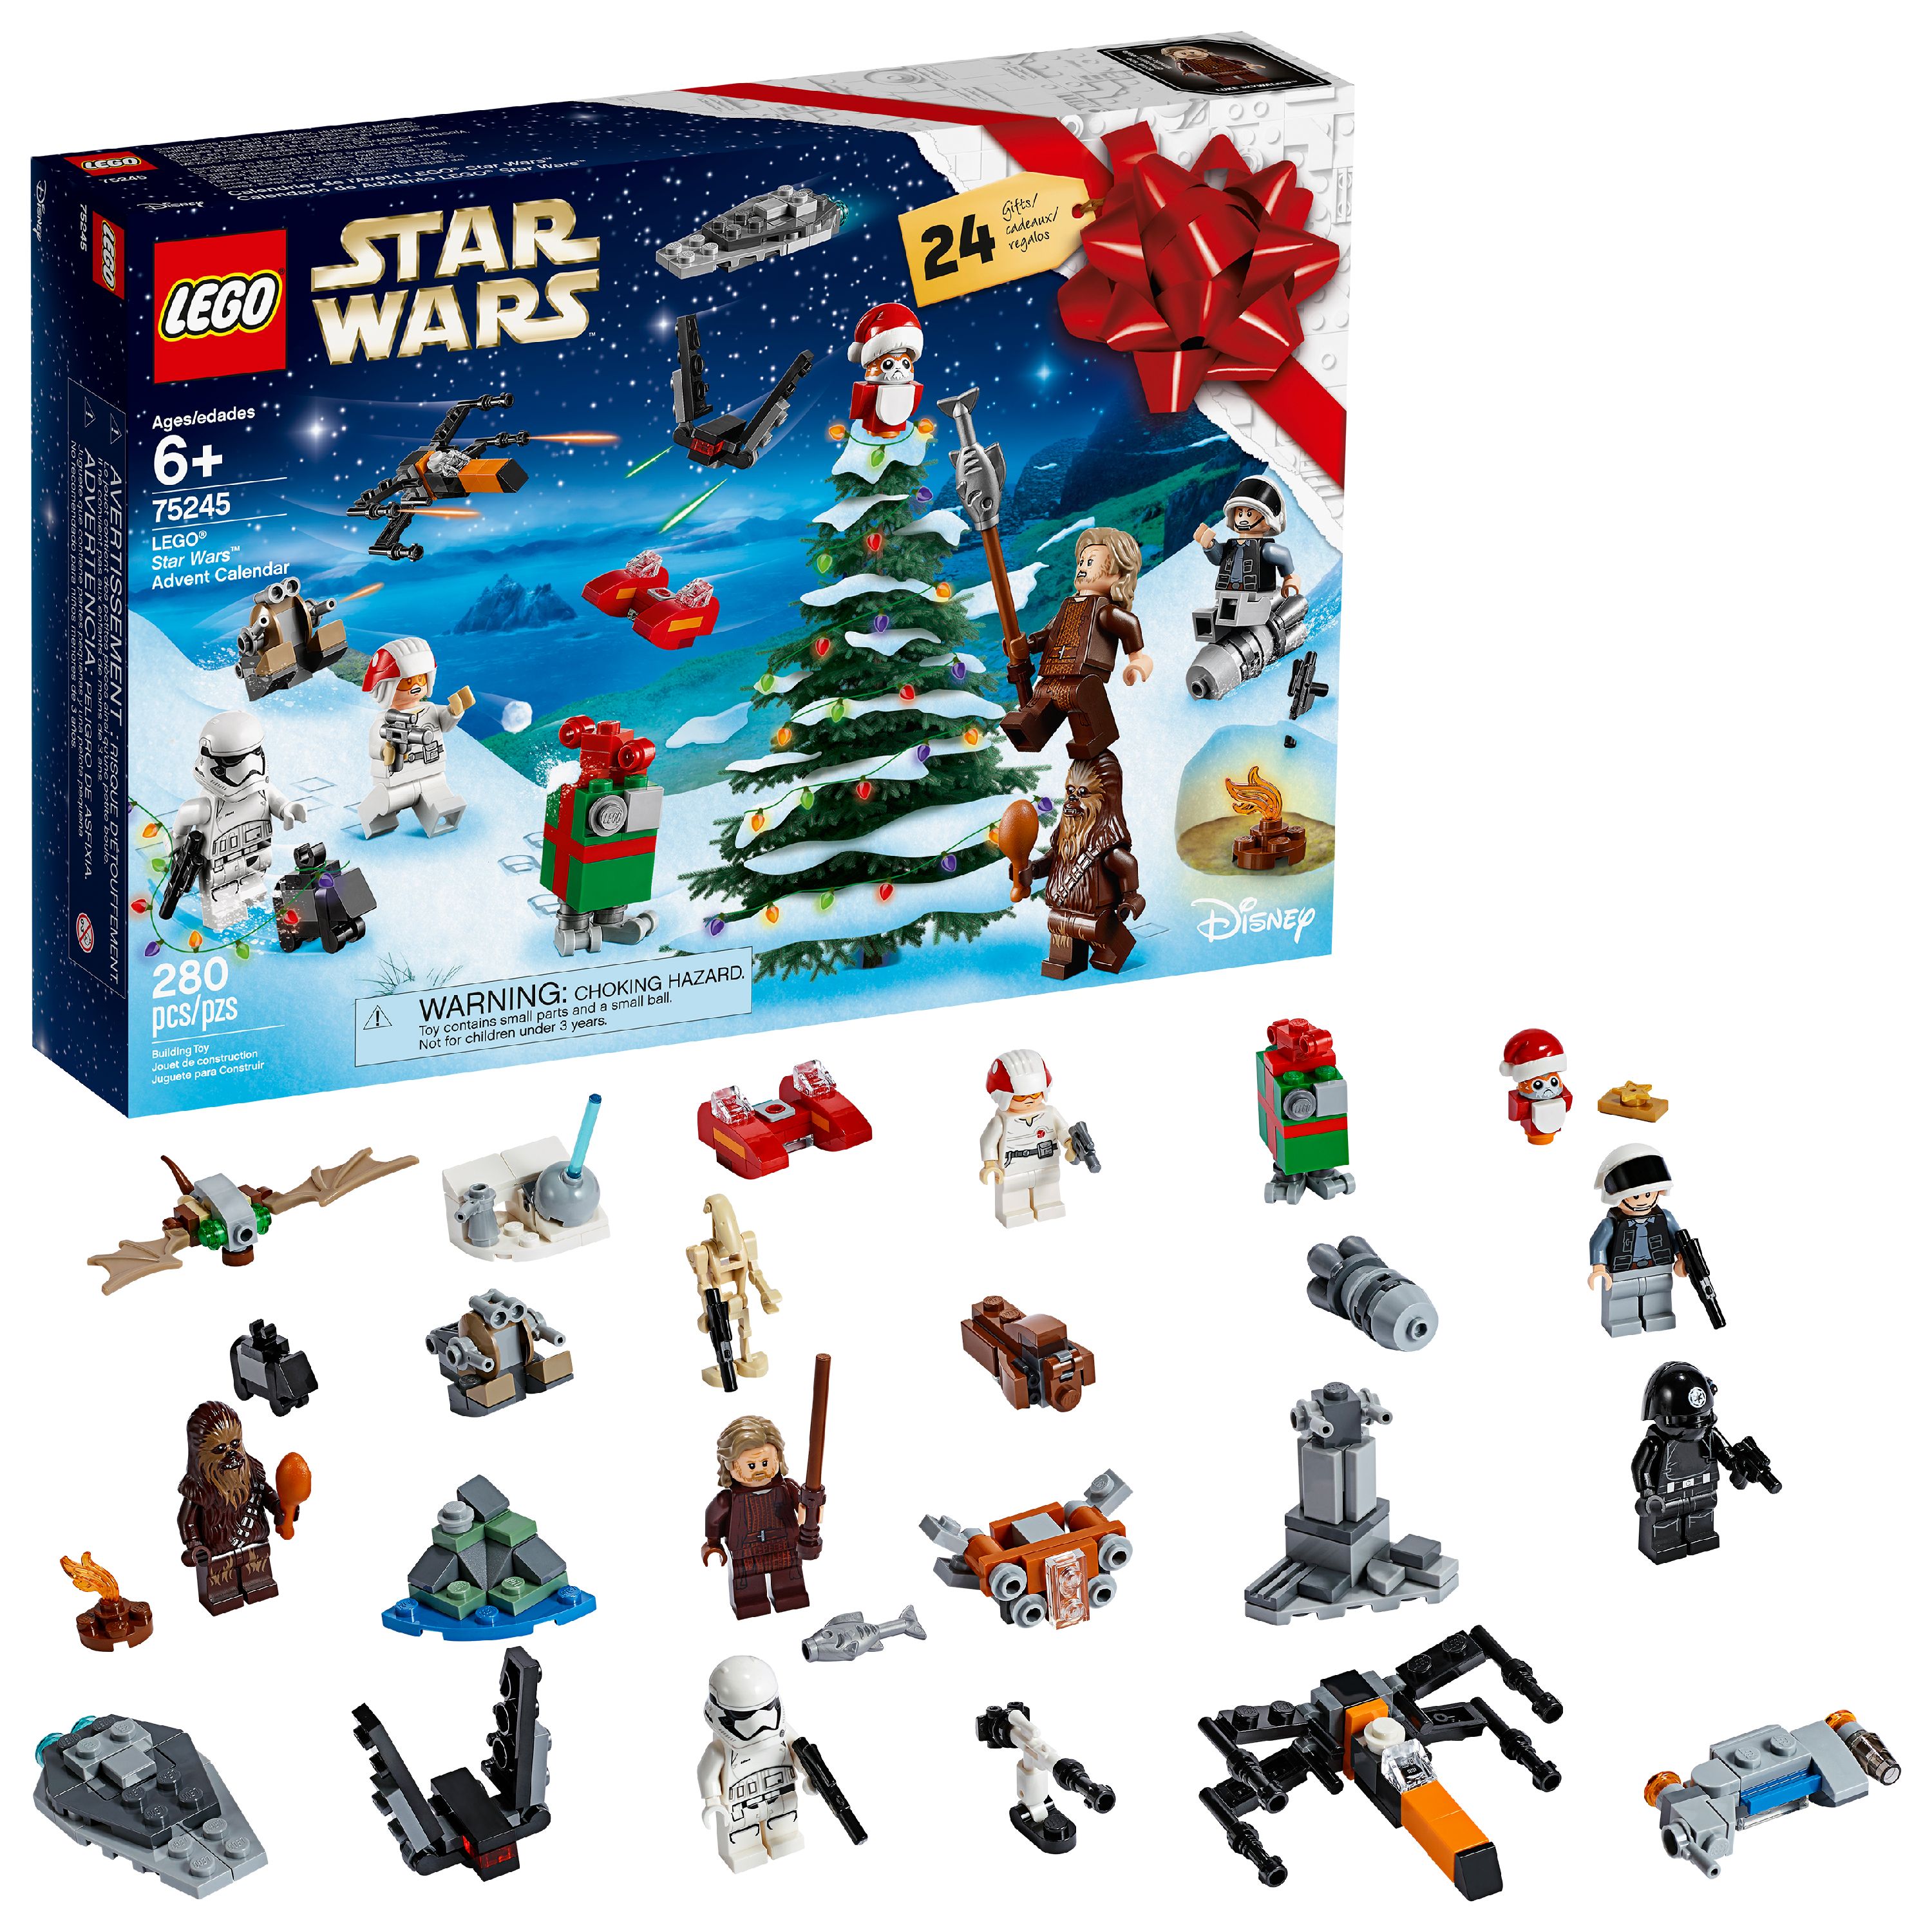 LEGO 75245 Star Wars Advent Calendar Building Kit (280 Pieces) - image 1 of 7